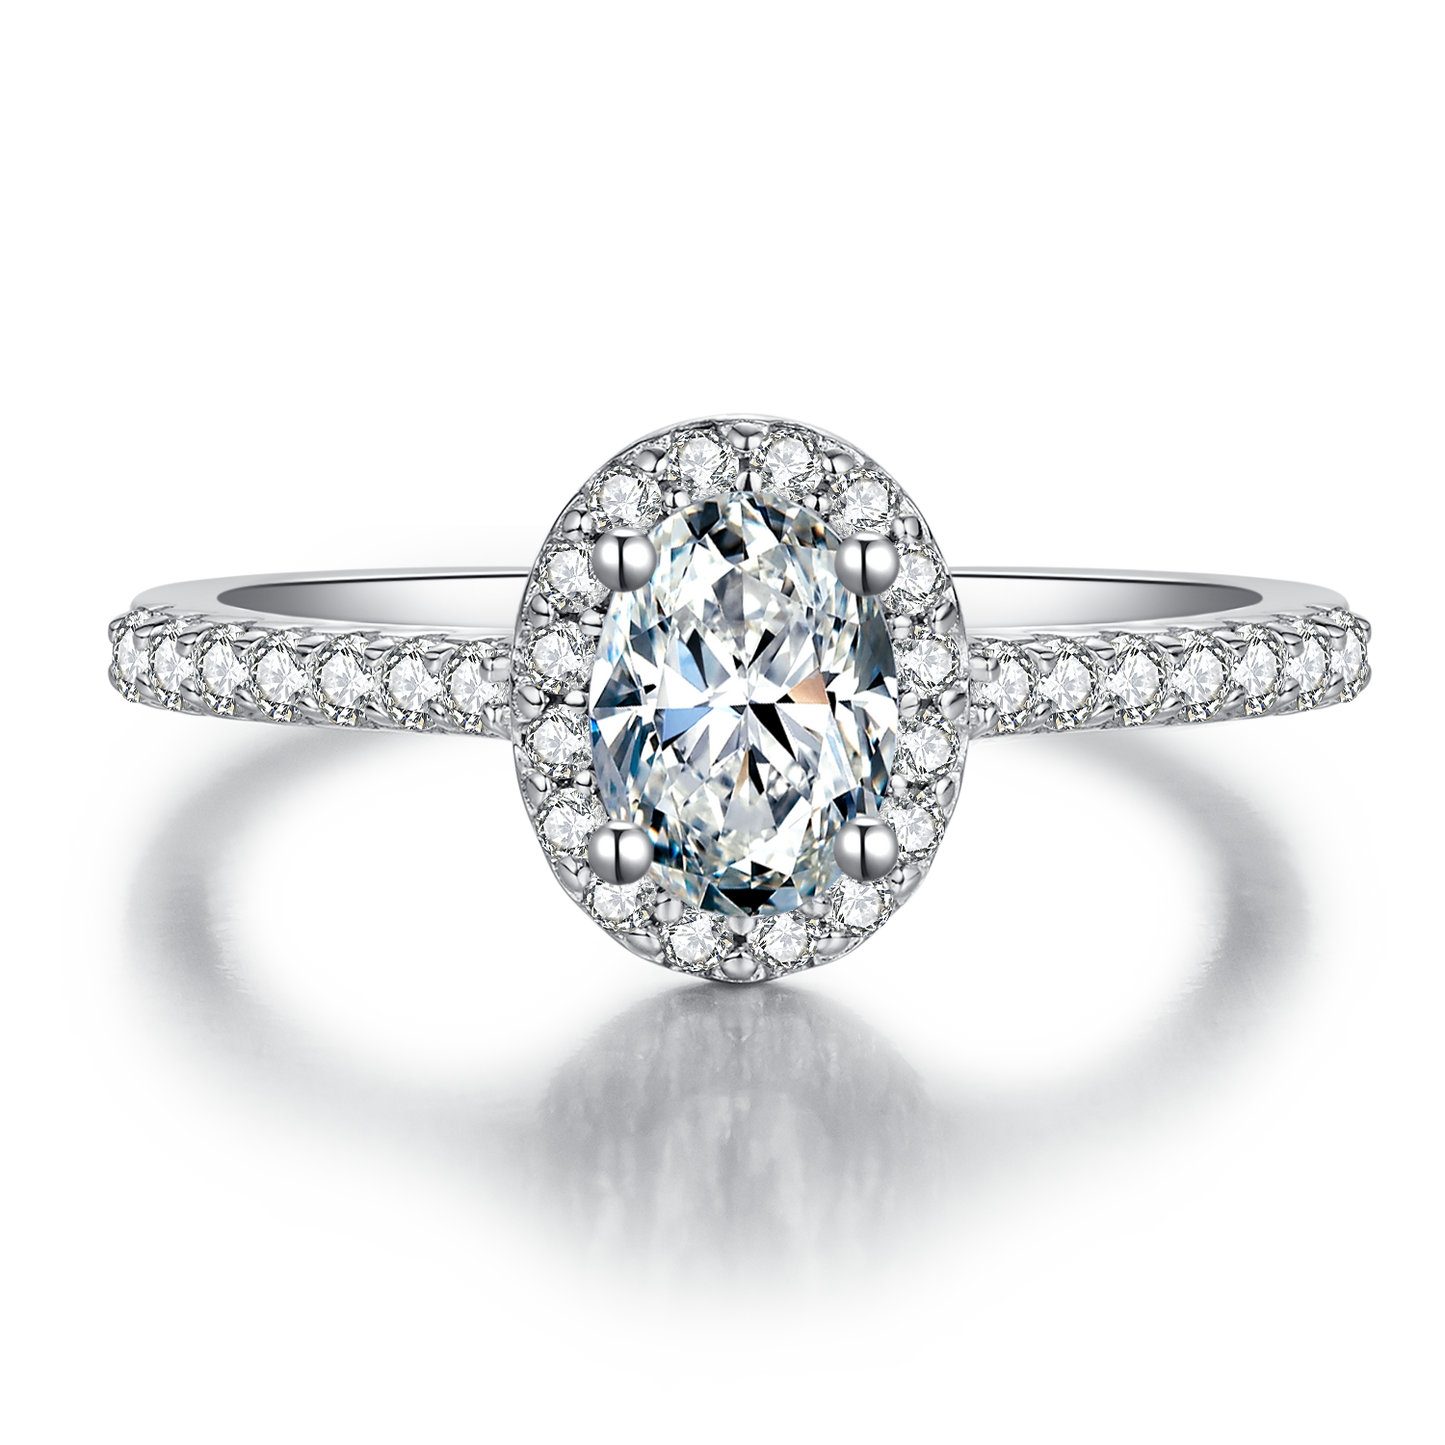 A silver oval halo ring.